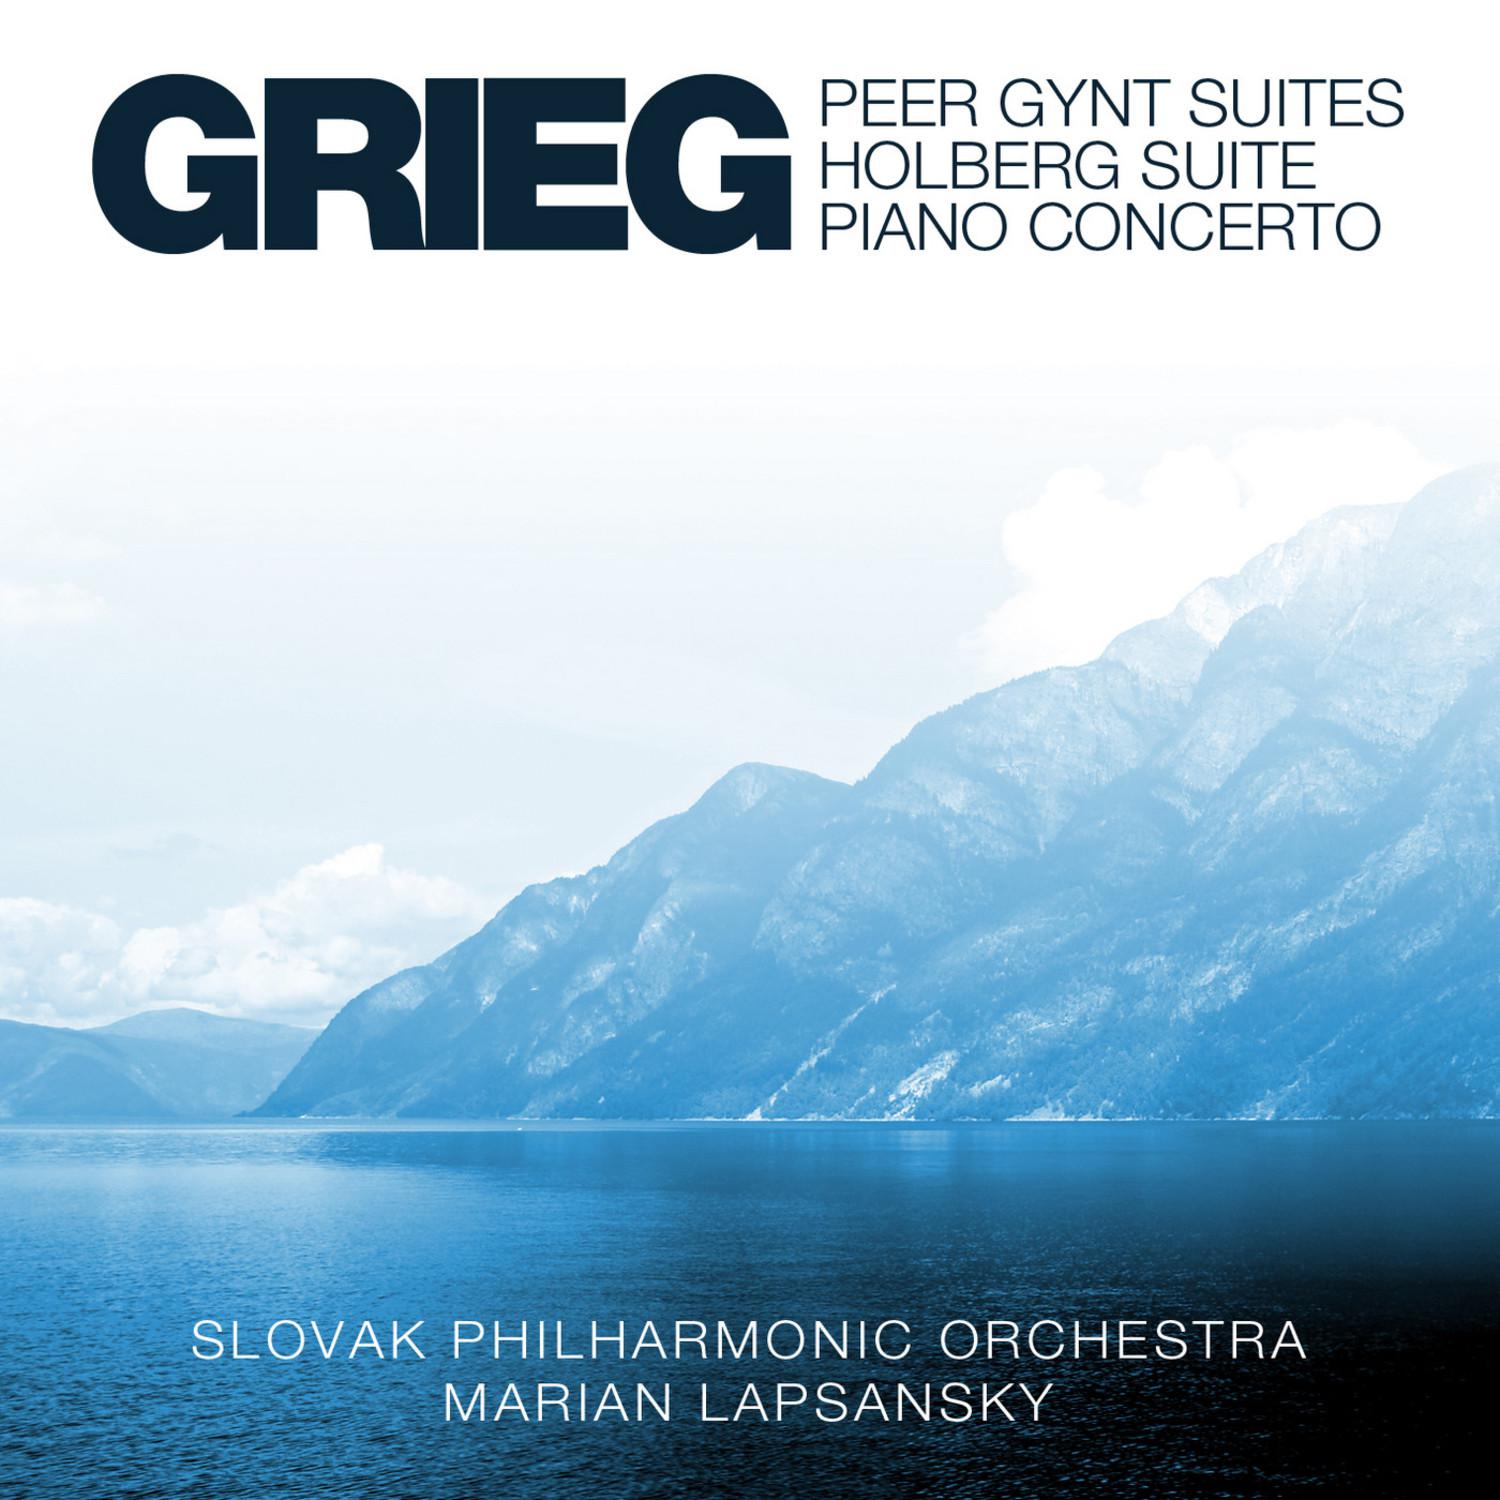 Peer Gynt Suite No. 2, Op. 55: IV. Solveig's Song: Andante - Allegretto tranquillamente